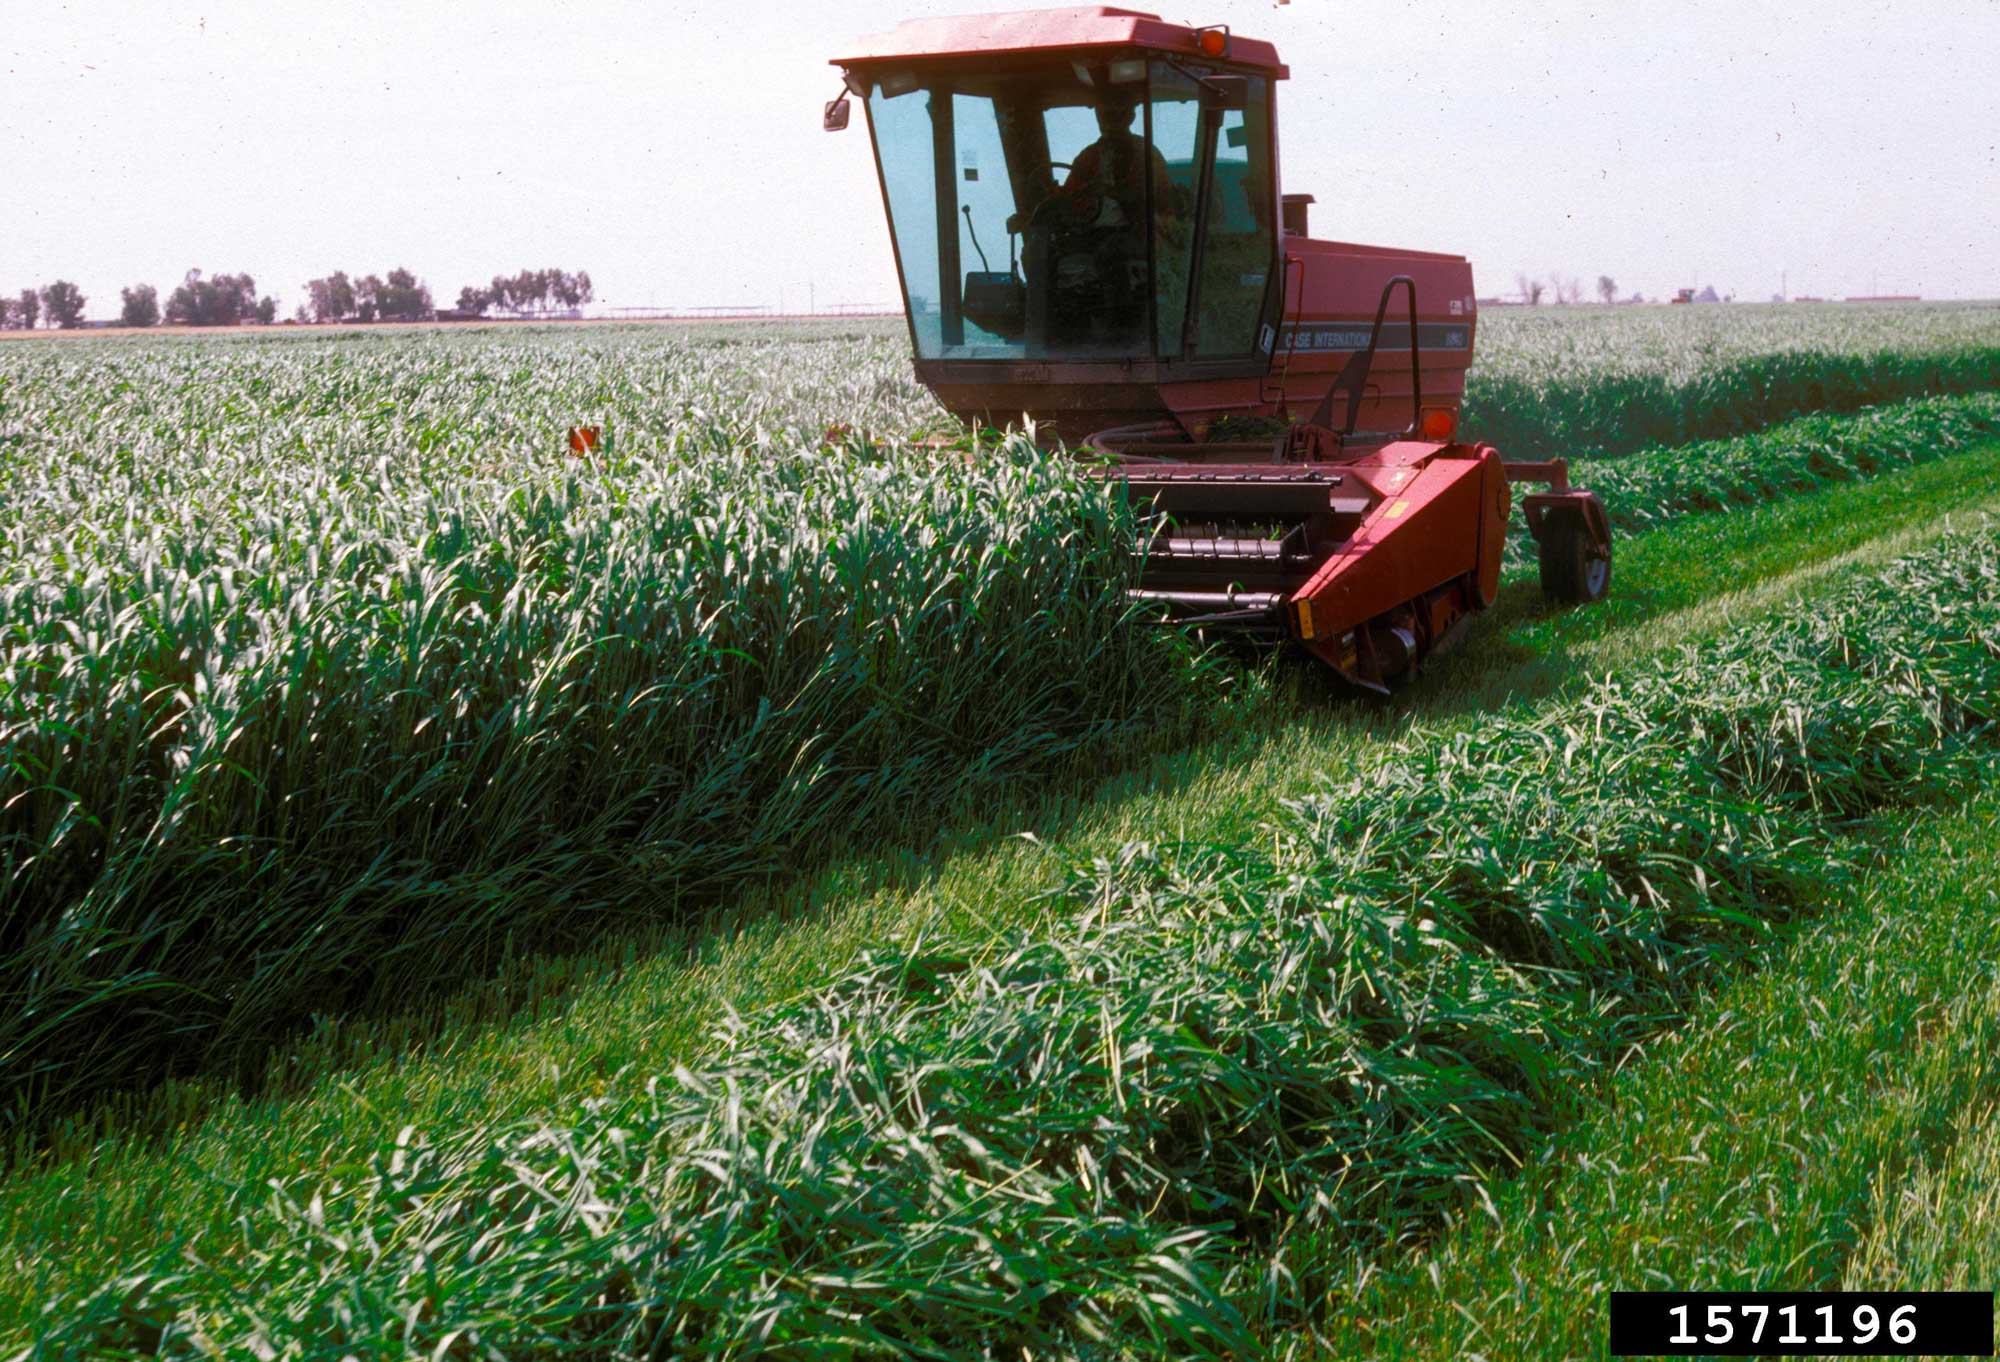 Photograph of a field of sudangrass being cut. The photo shows a red vehicle being driven through a field of sudangrass. The vehicle has a cutting attachment on its front. In the lower right corner of the image, the grass has been cut, and is lying heaped in a long row. In the upper left corner, the grass is still standing.